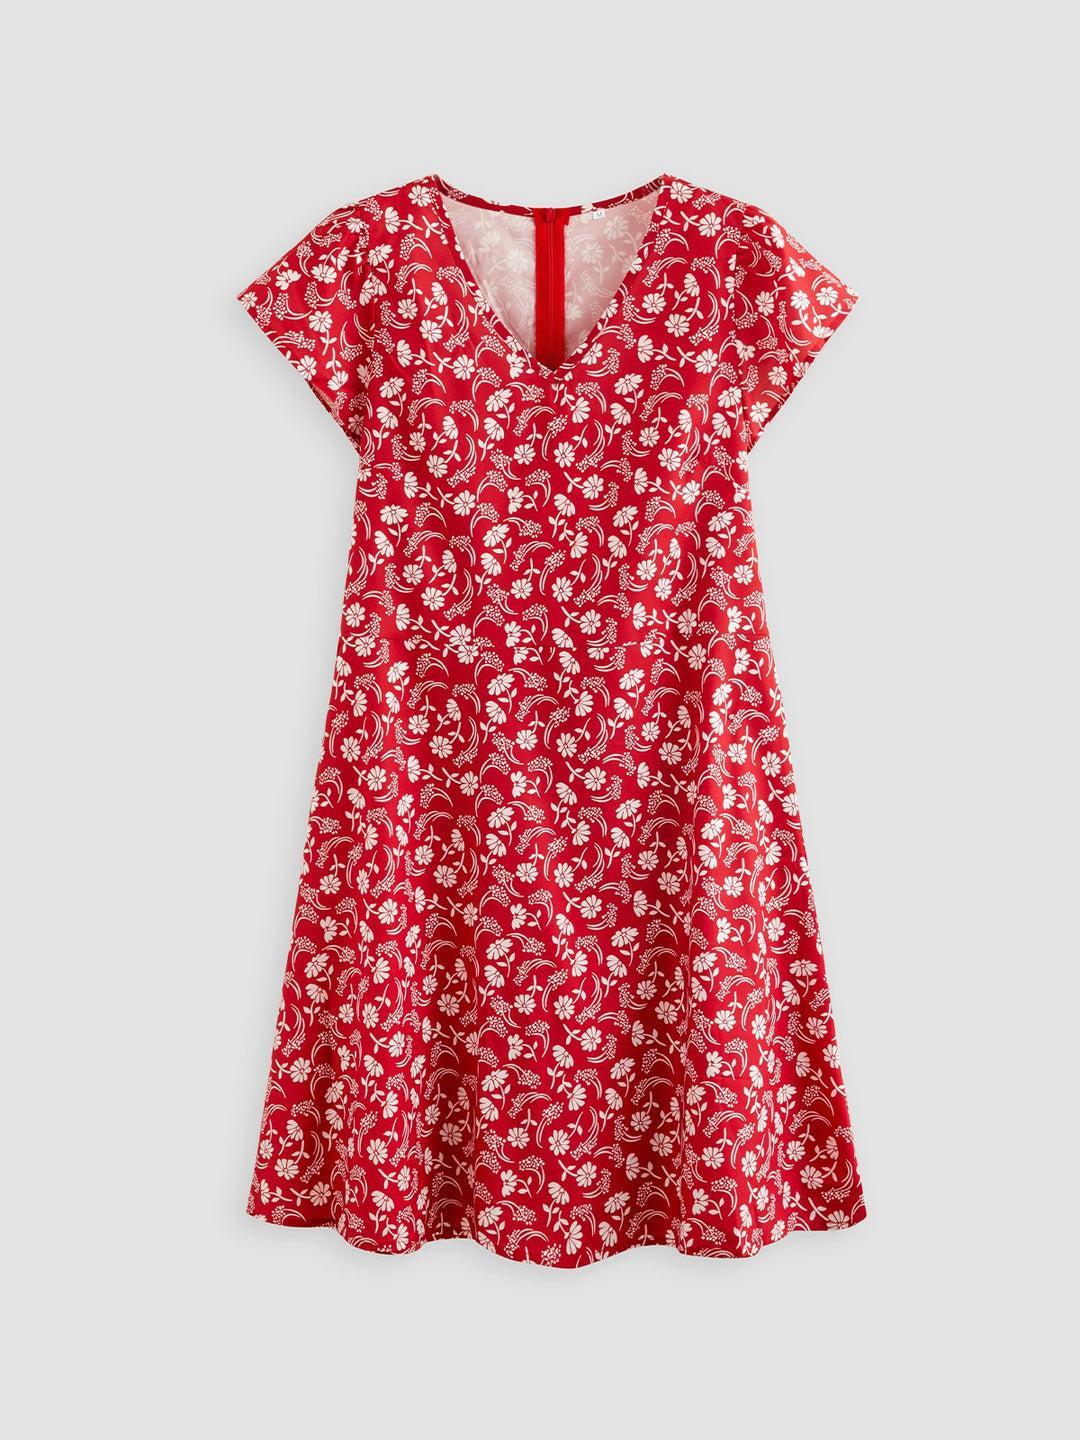 Elegant Lady Dress with Floral Pattern, Red 3XL